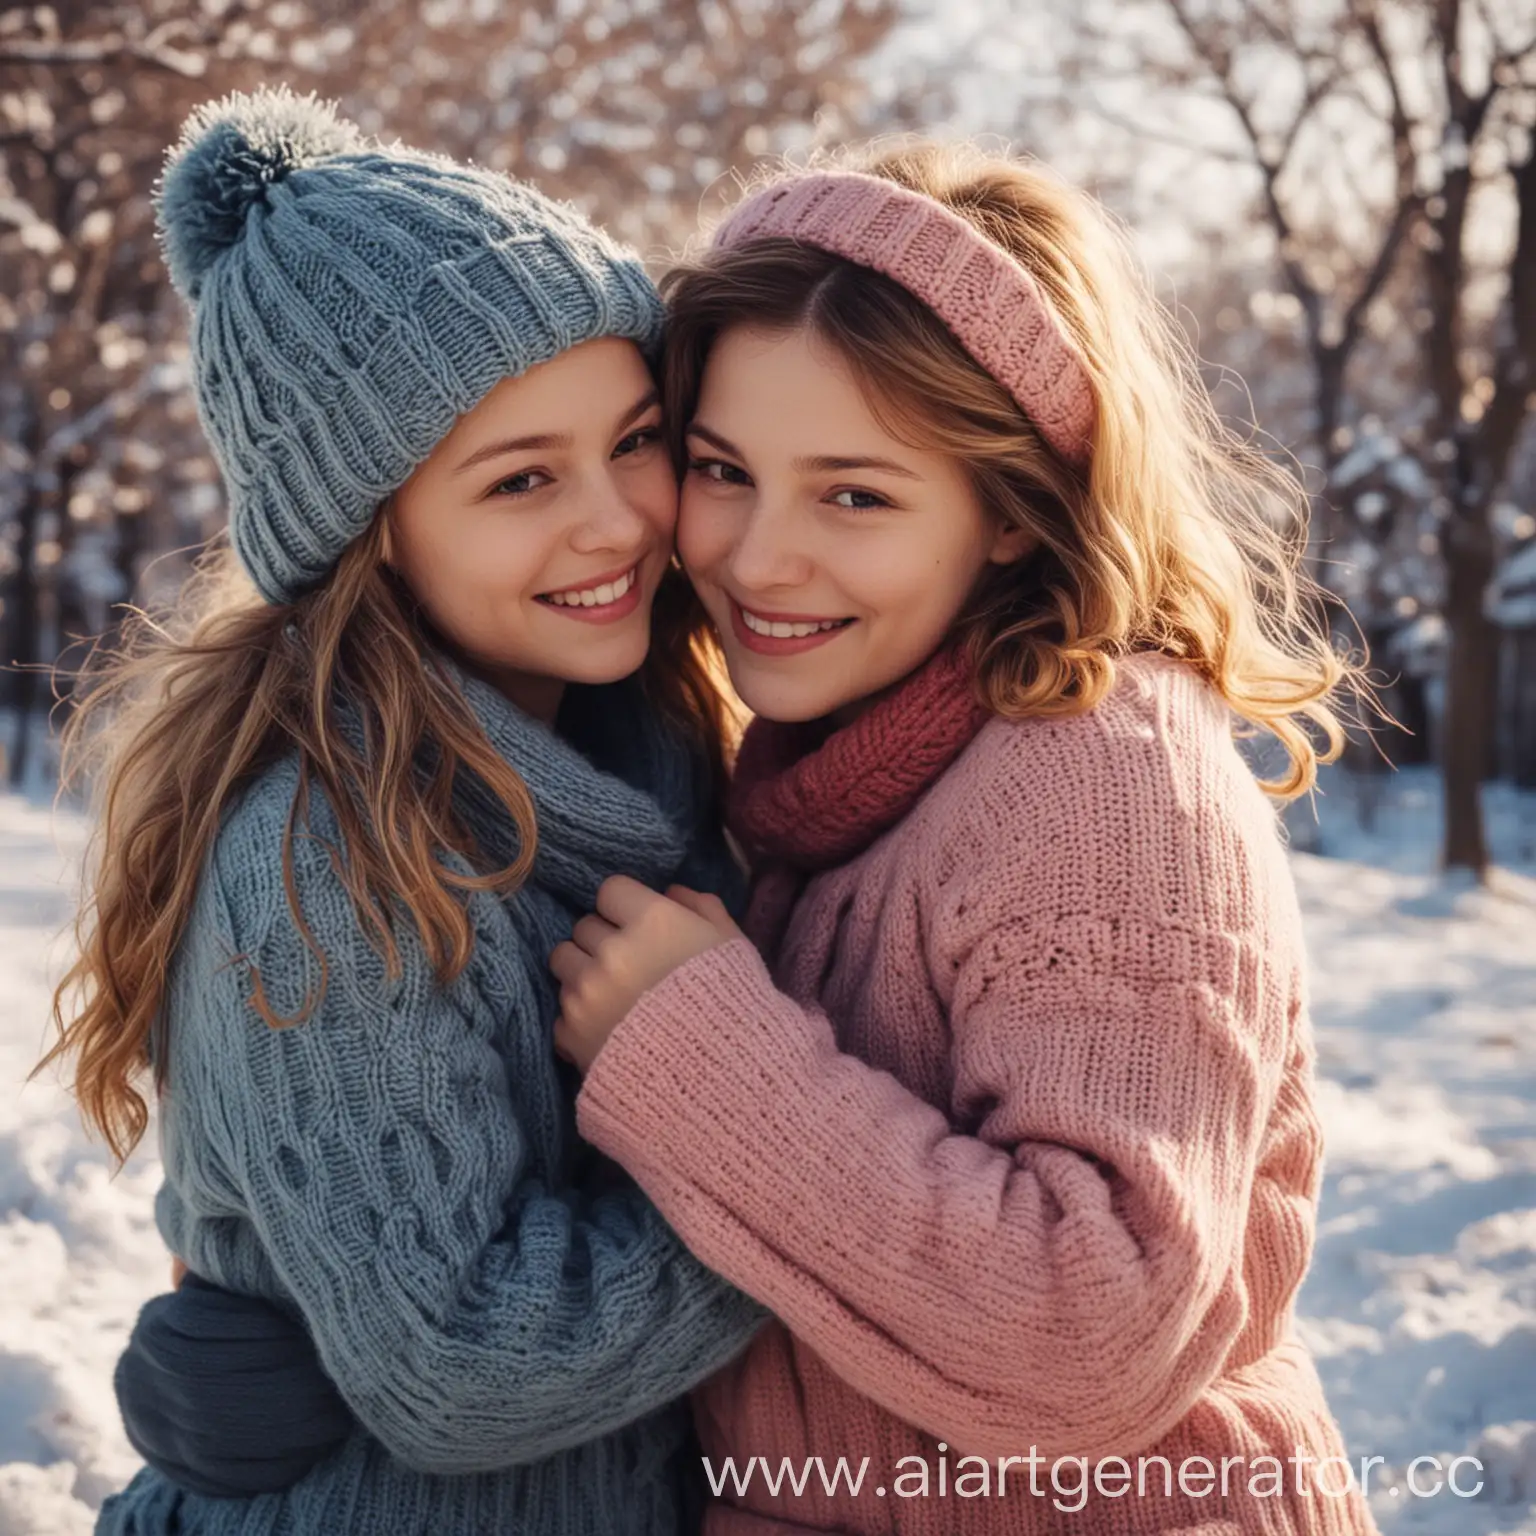 February-Friendship-Warm-Hearts-in-Winter-with-Friends